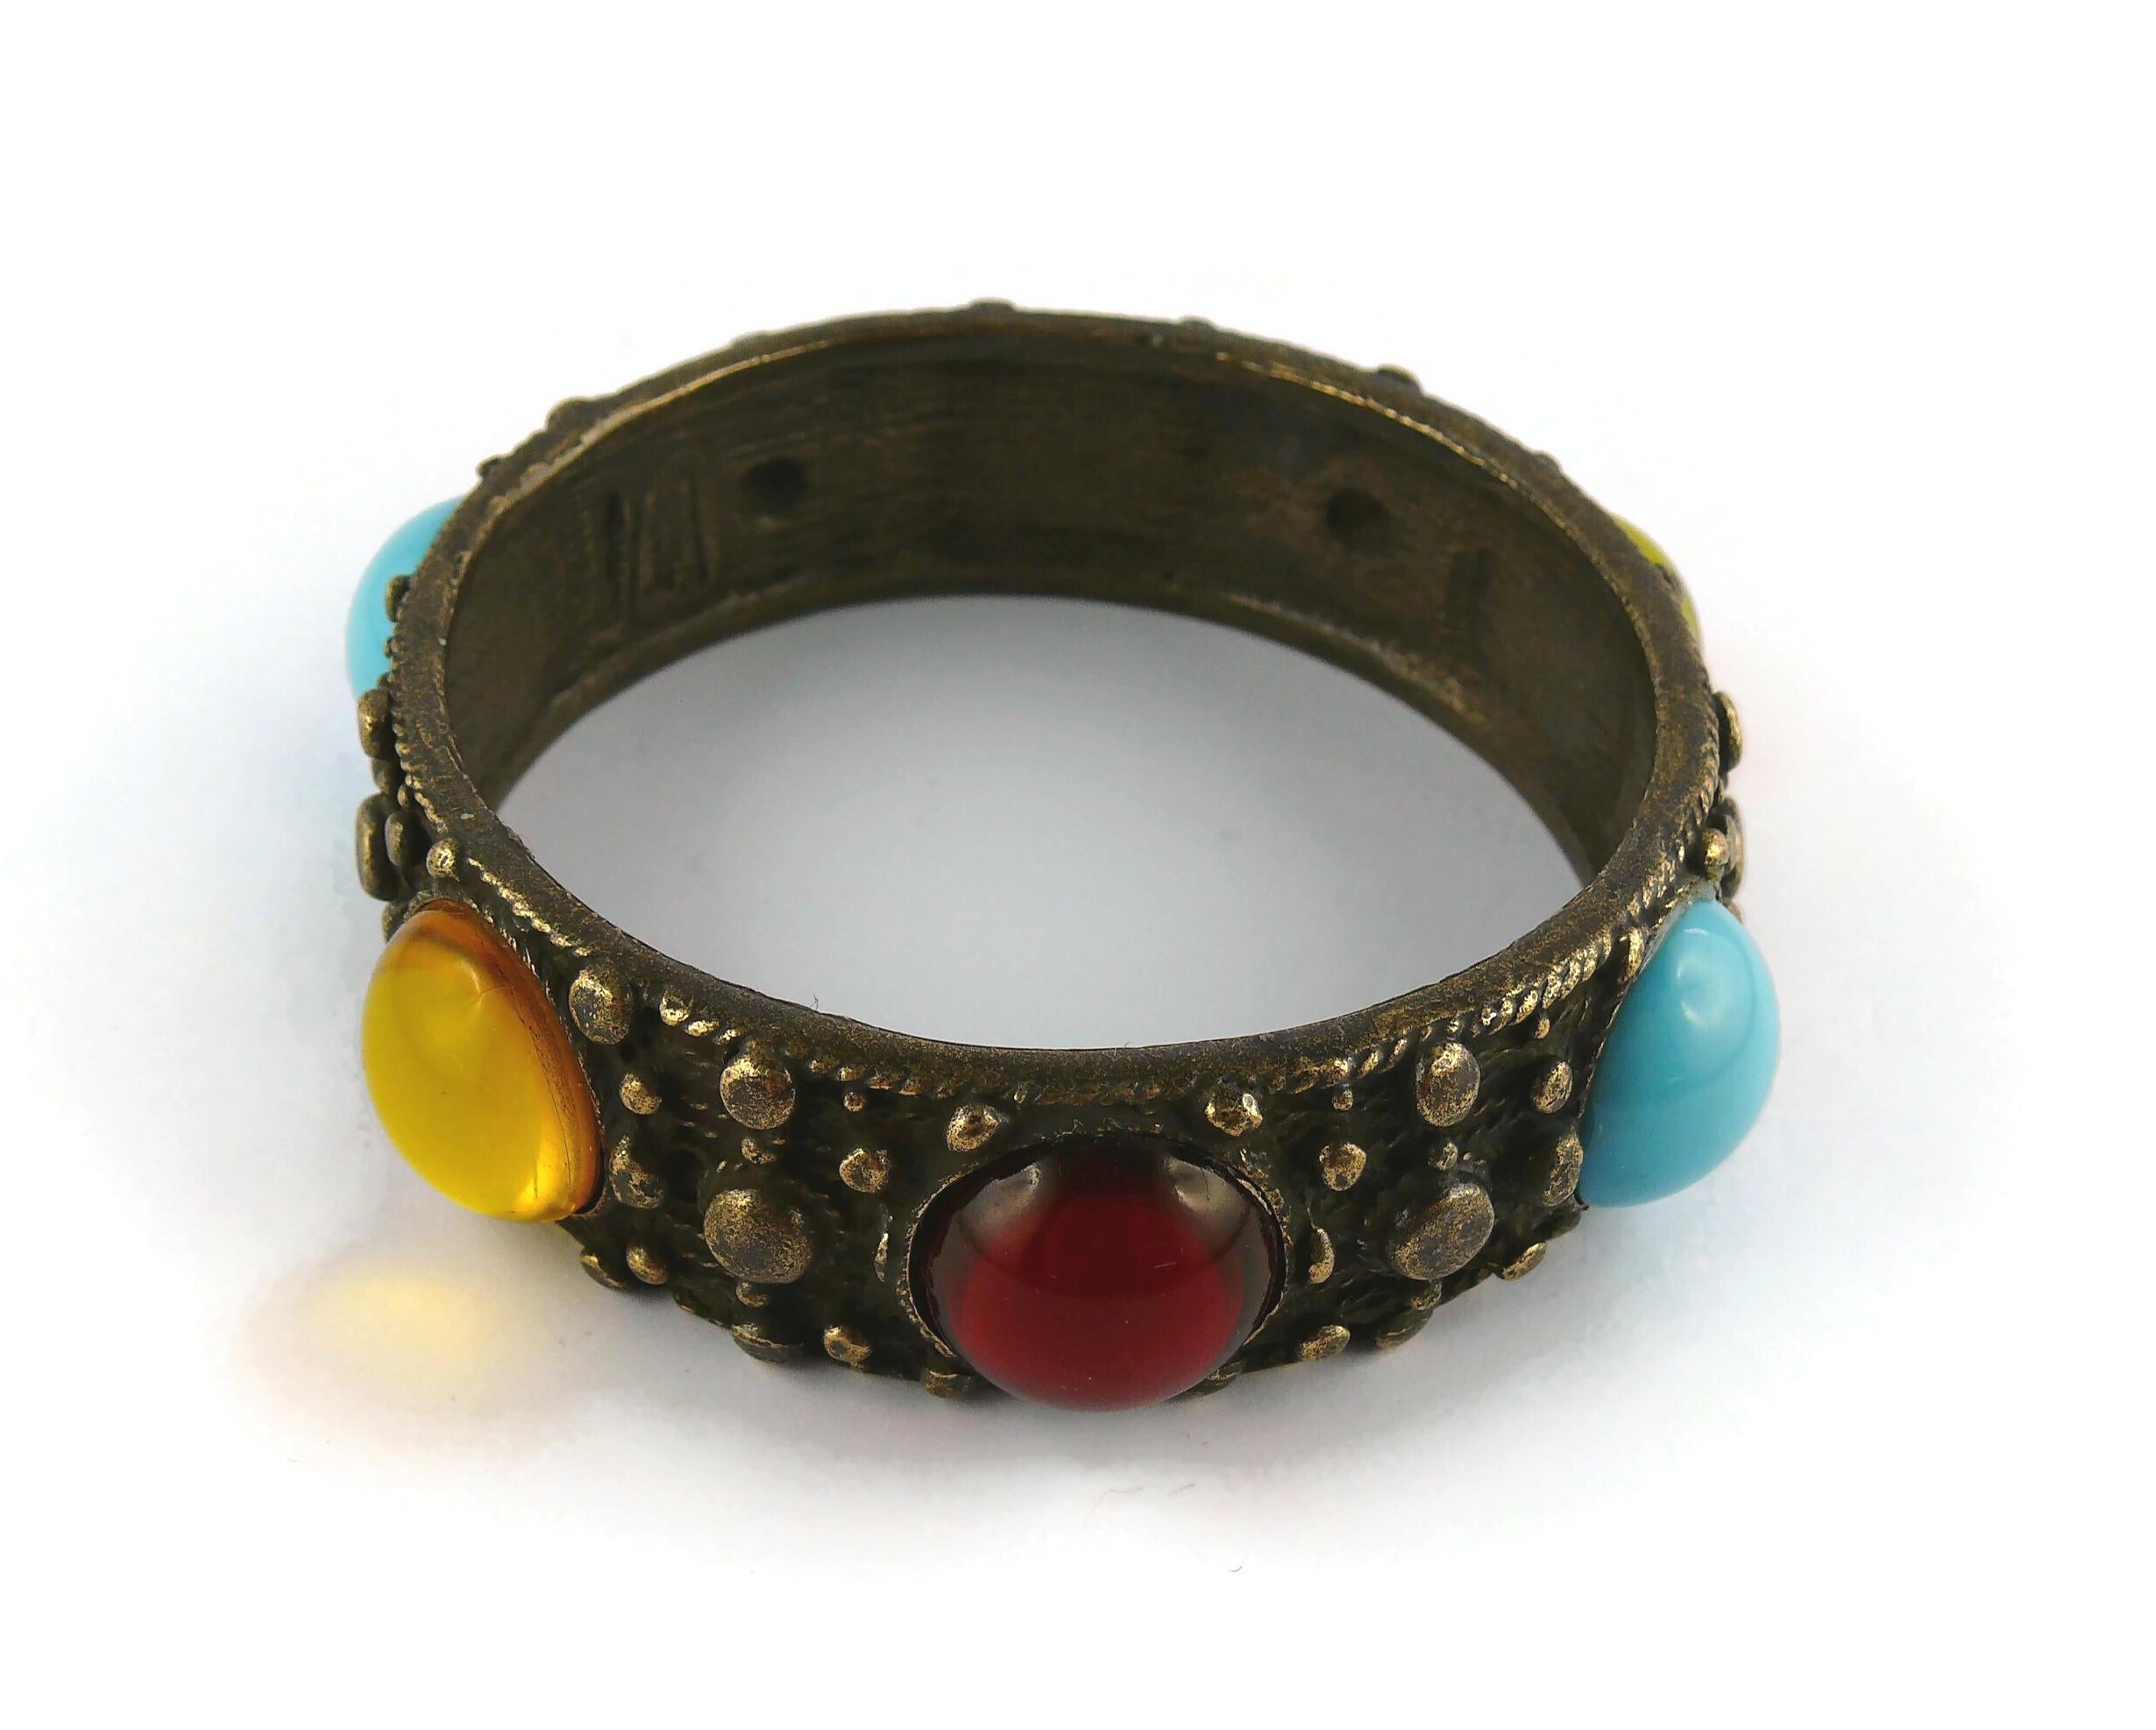 JEAN PAUL GAULTIER antiqued bronze toned bracelet embellished with multicolored glass cabochons.

Embossed JEAN PAUL GAULTIER.

Indicative measurements : inner circumference approx. 21.05 cm (8.29 inches) / total diameter approx. 7.4 cm (2.91